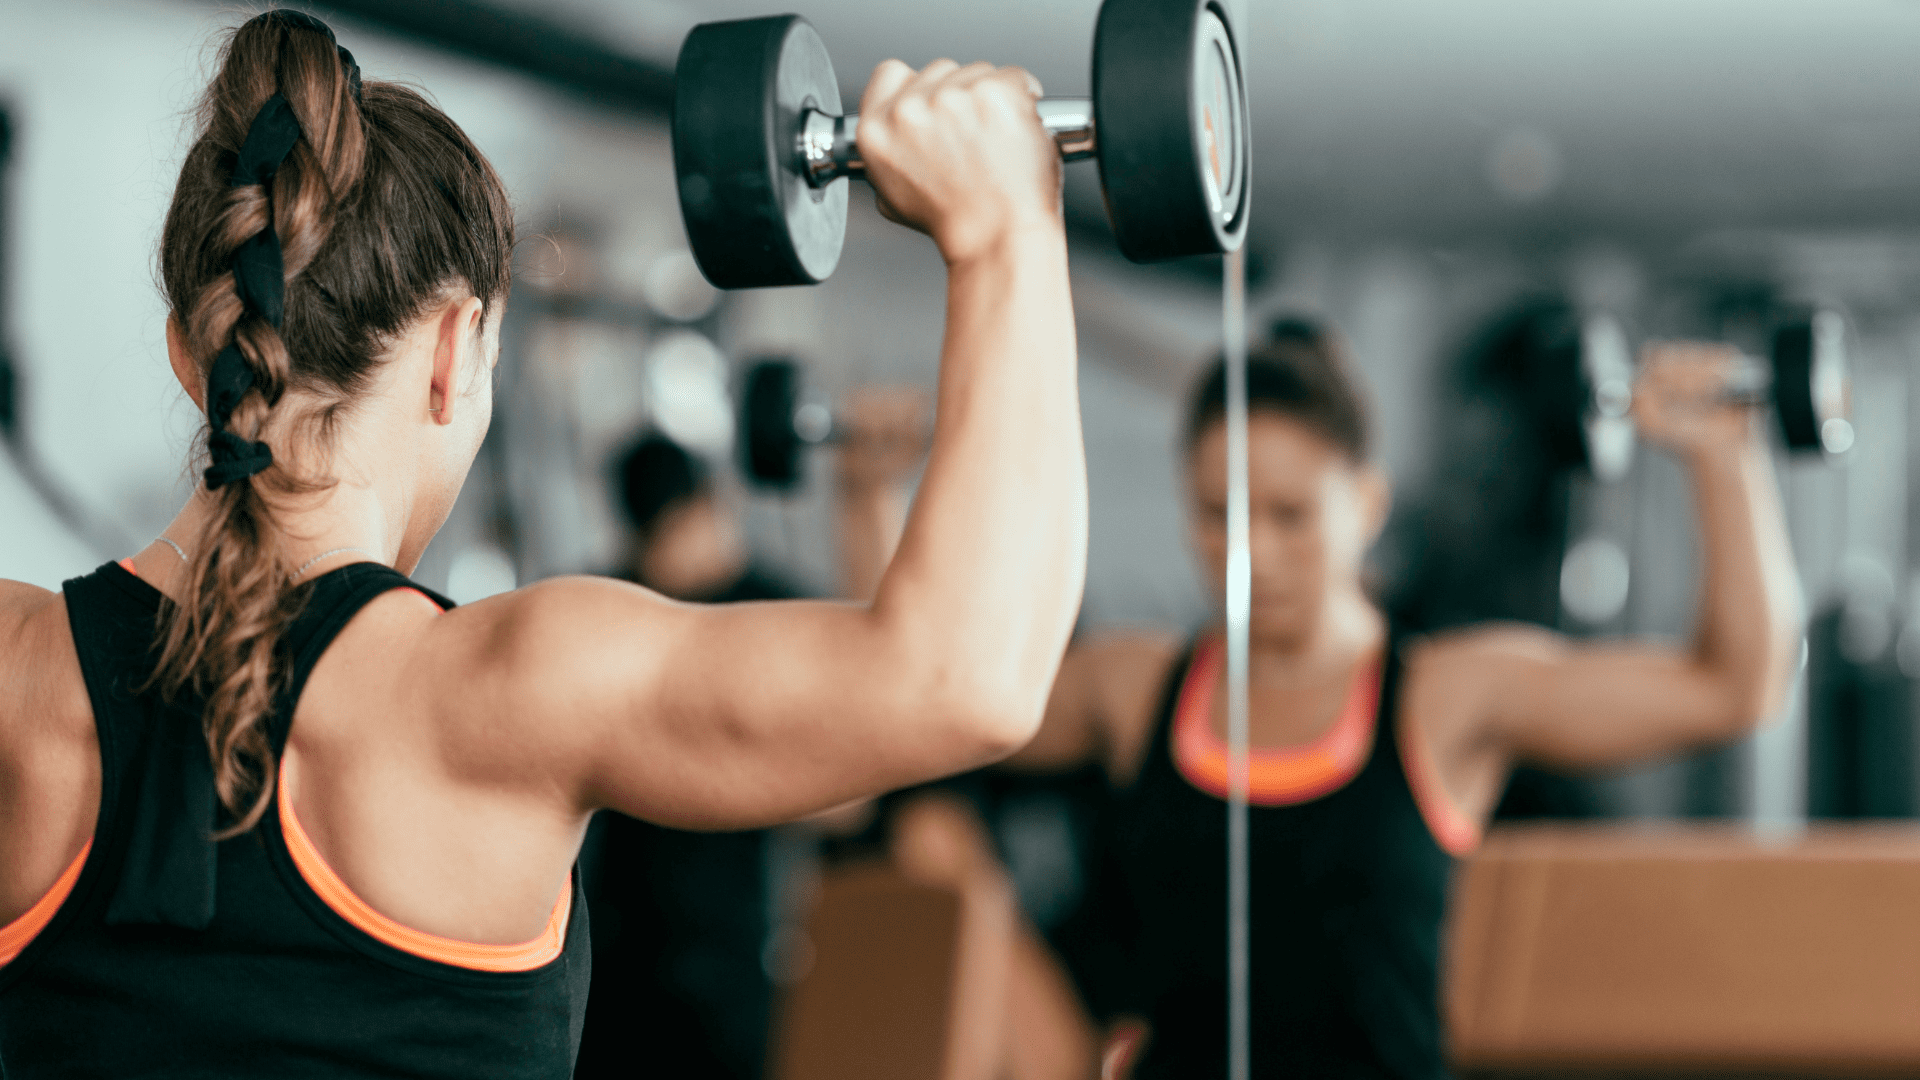 Women participating in strength training